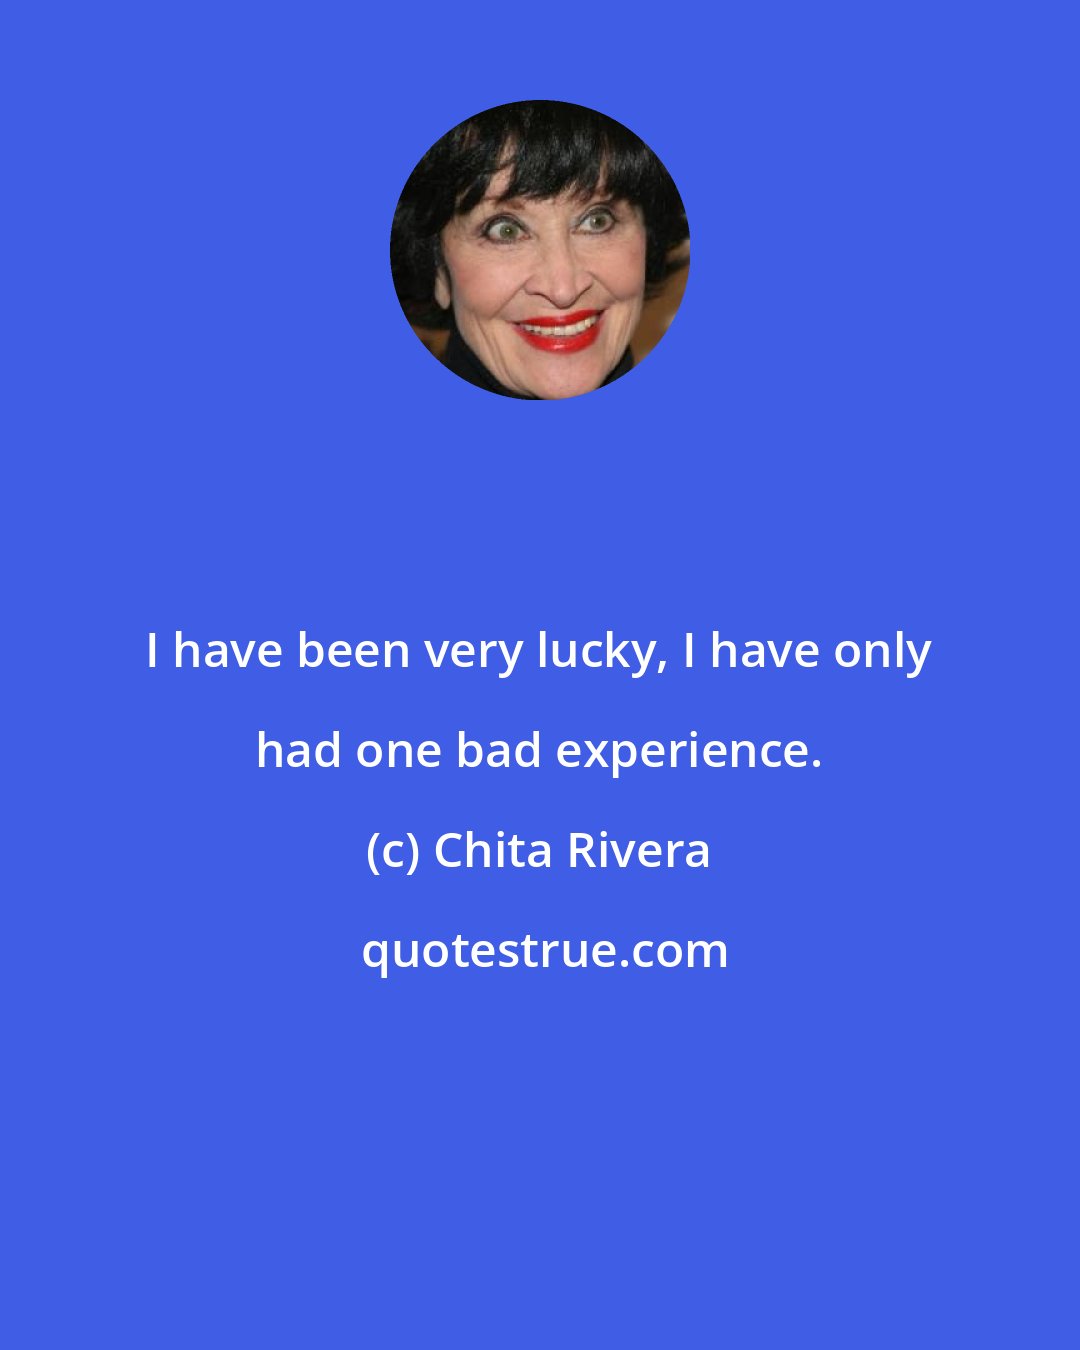 Chita Rivera: I have been very lucky, I have only had one bad experience.